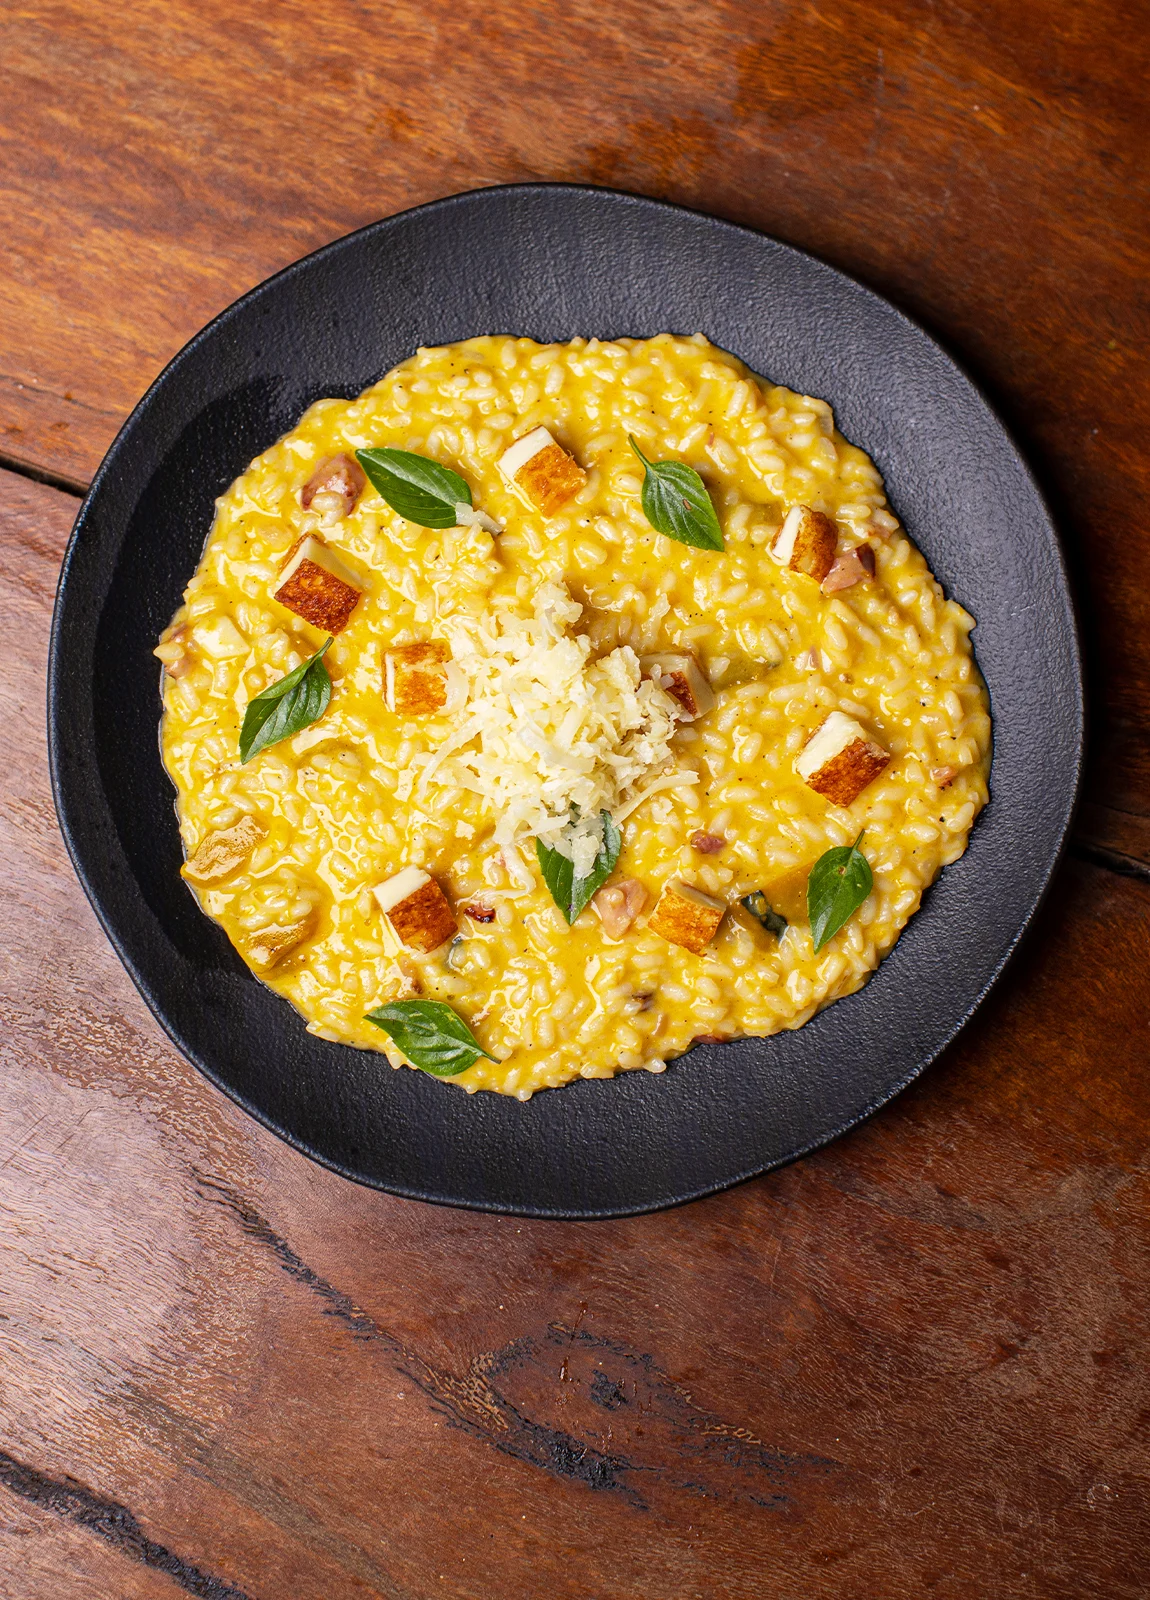 Pumpkin Risotto with Bacon & Cheese